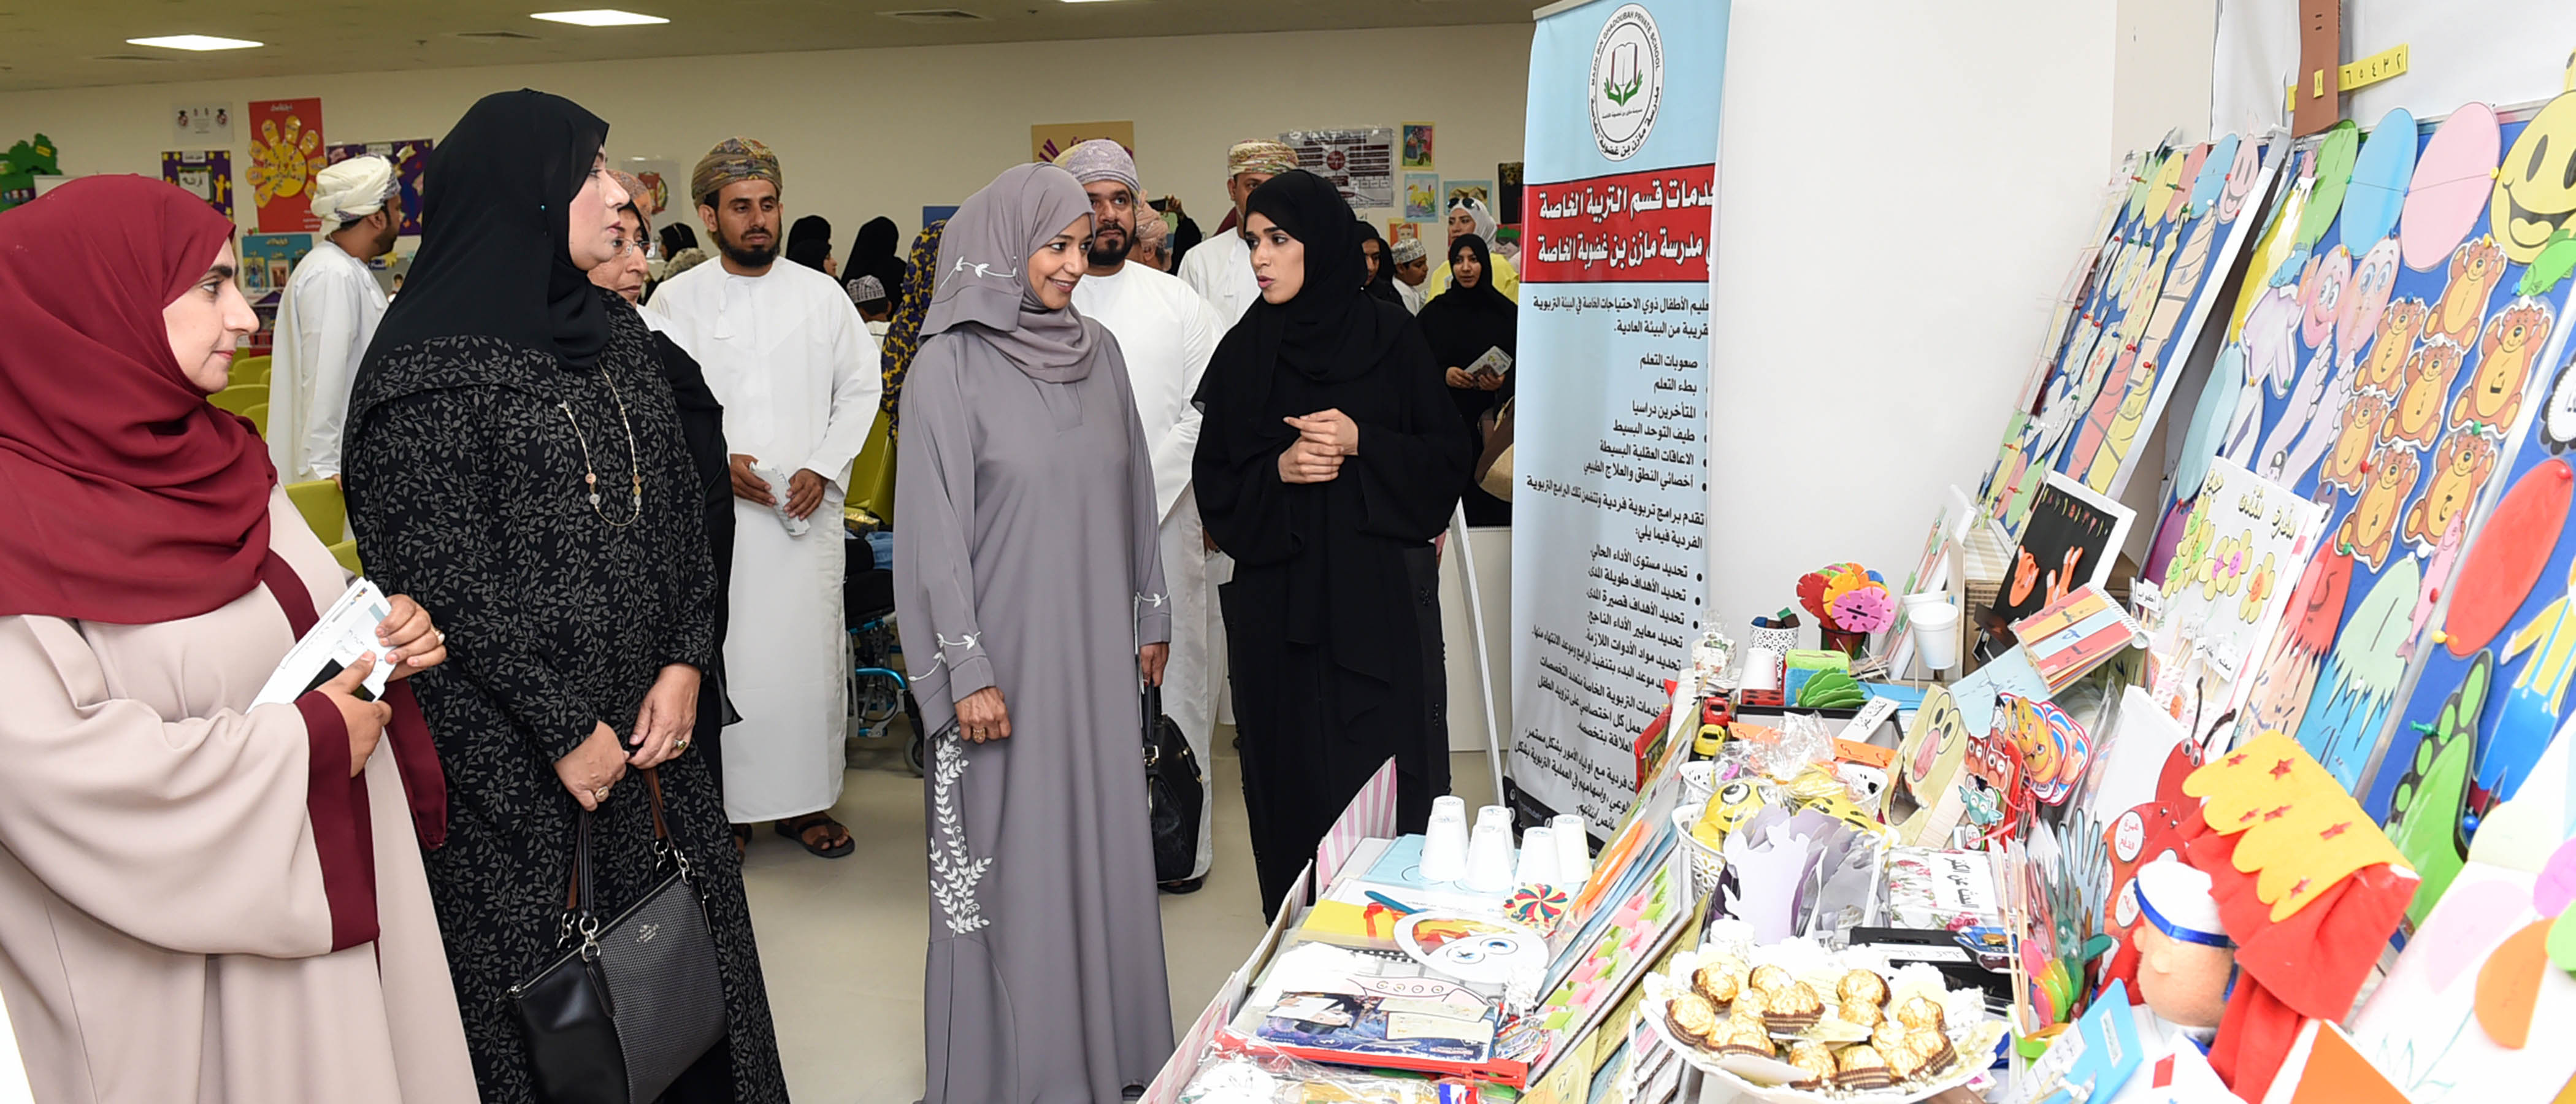 Ministry organises event for children with special needs